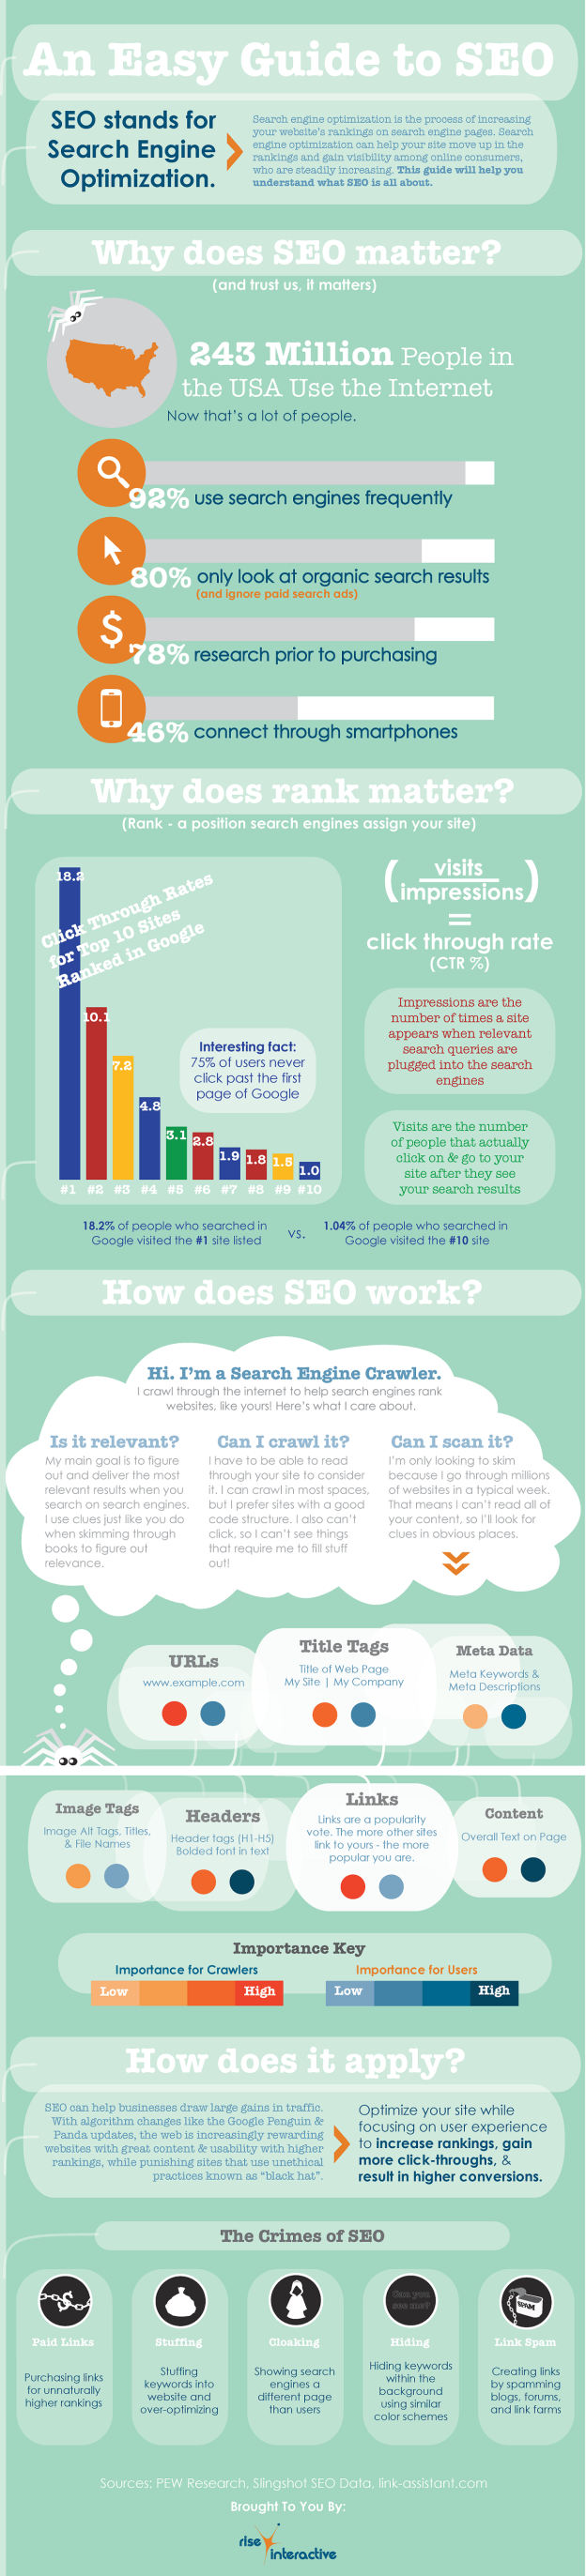 Guide-to-SEO